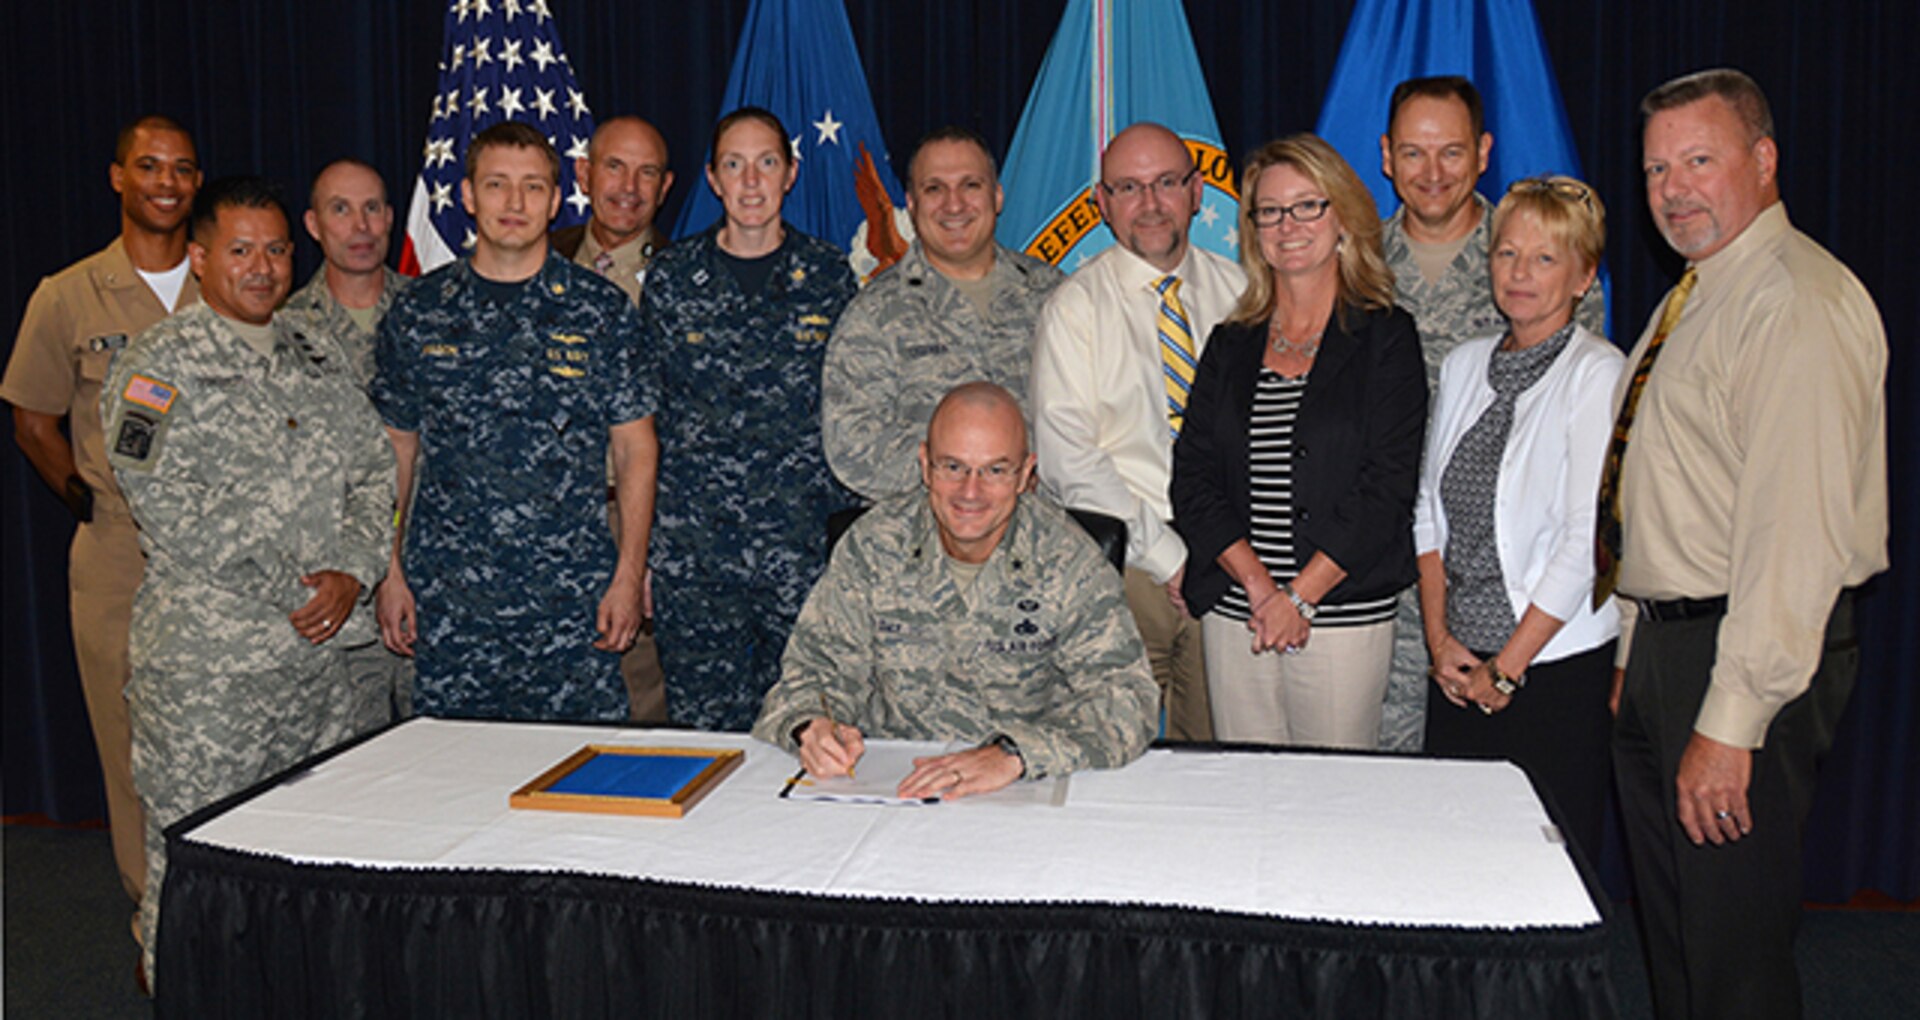 Defense Logistics Agency Aviation team members pose with DLA Aviation Commander Air Force Brig. Gen. Allan Day Sept. 17, 2015 in the commander’s conference room on Defense Supply Center Richmond, Virginia, as he signs volume one of the agency’s retail supply manual. The manual, began 22 months ago, outlines day-to-day operational procedures designed to provide supply excellence for Air Force retail operations.